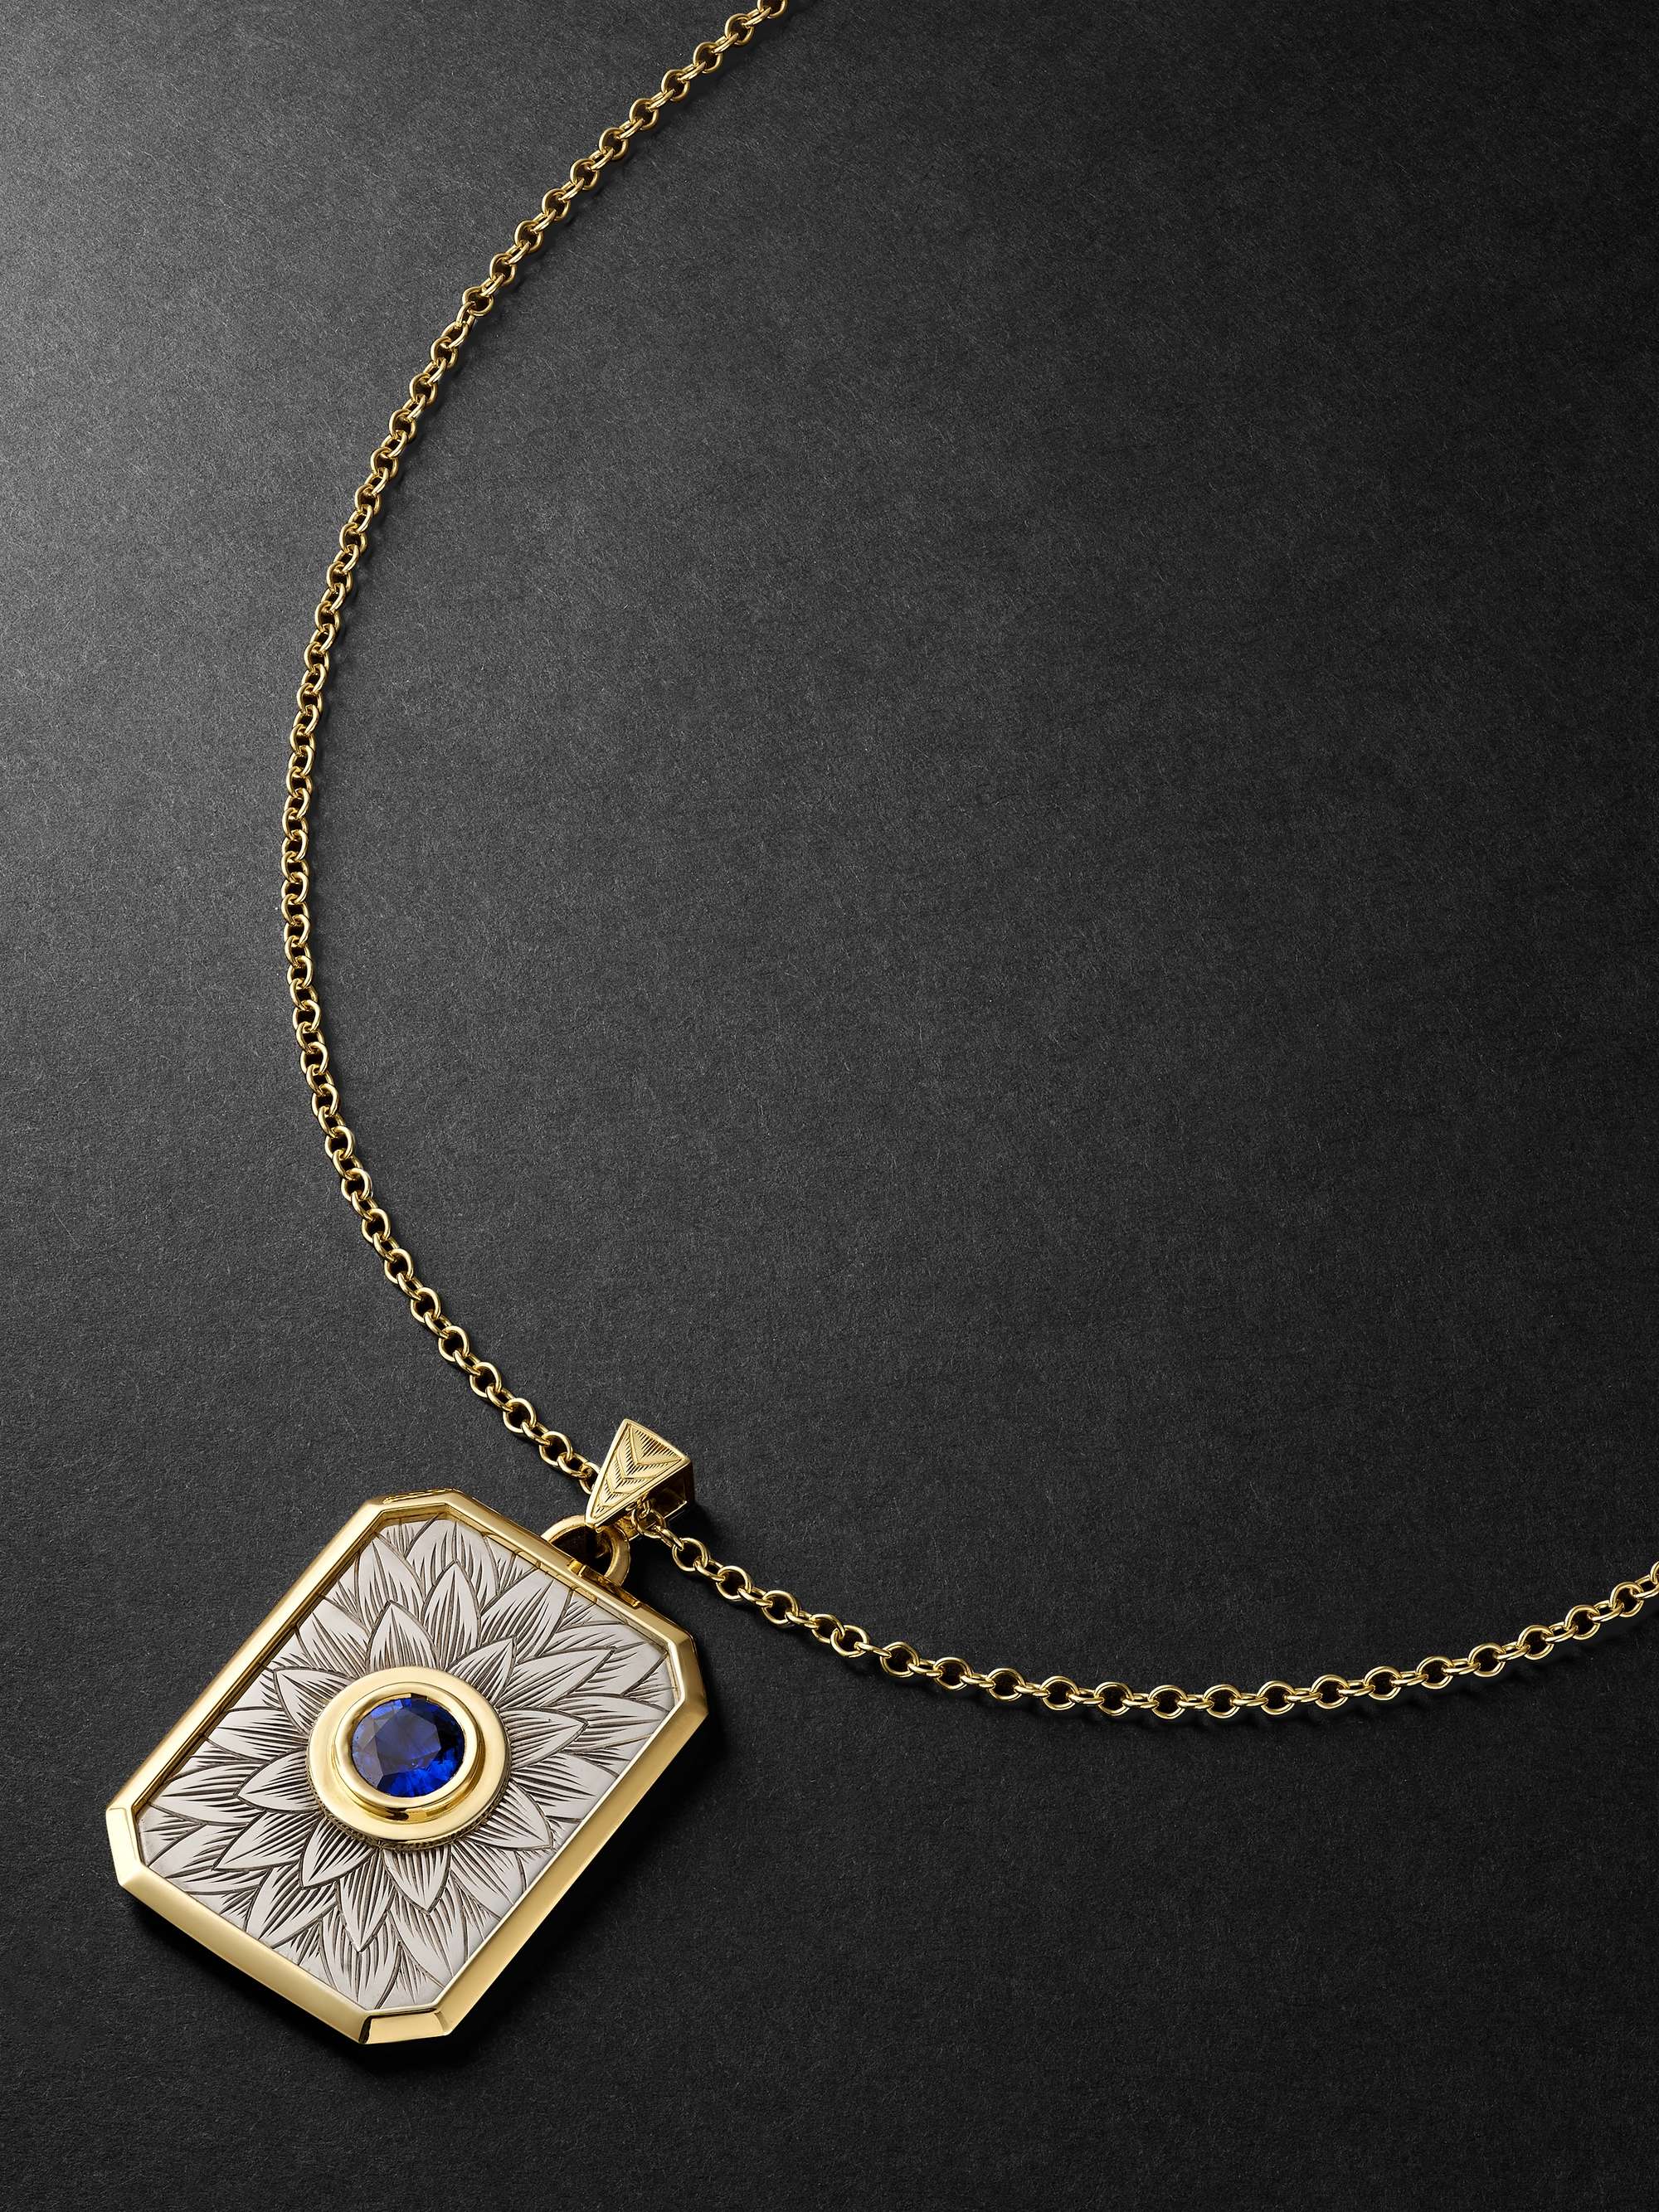 DUFFY JEWELLERY 18-Karat Yellow and White Gold Sapphire Necklace